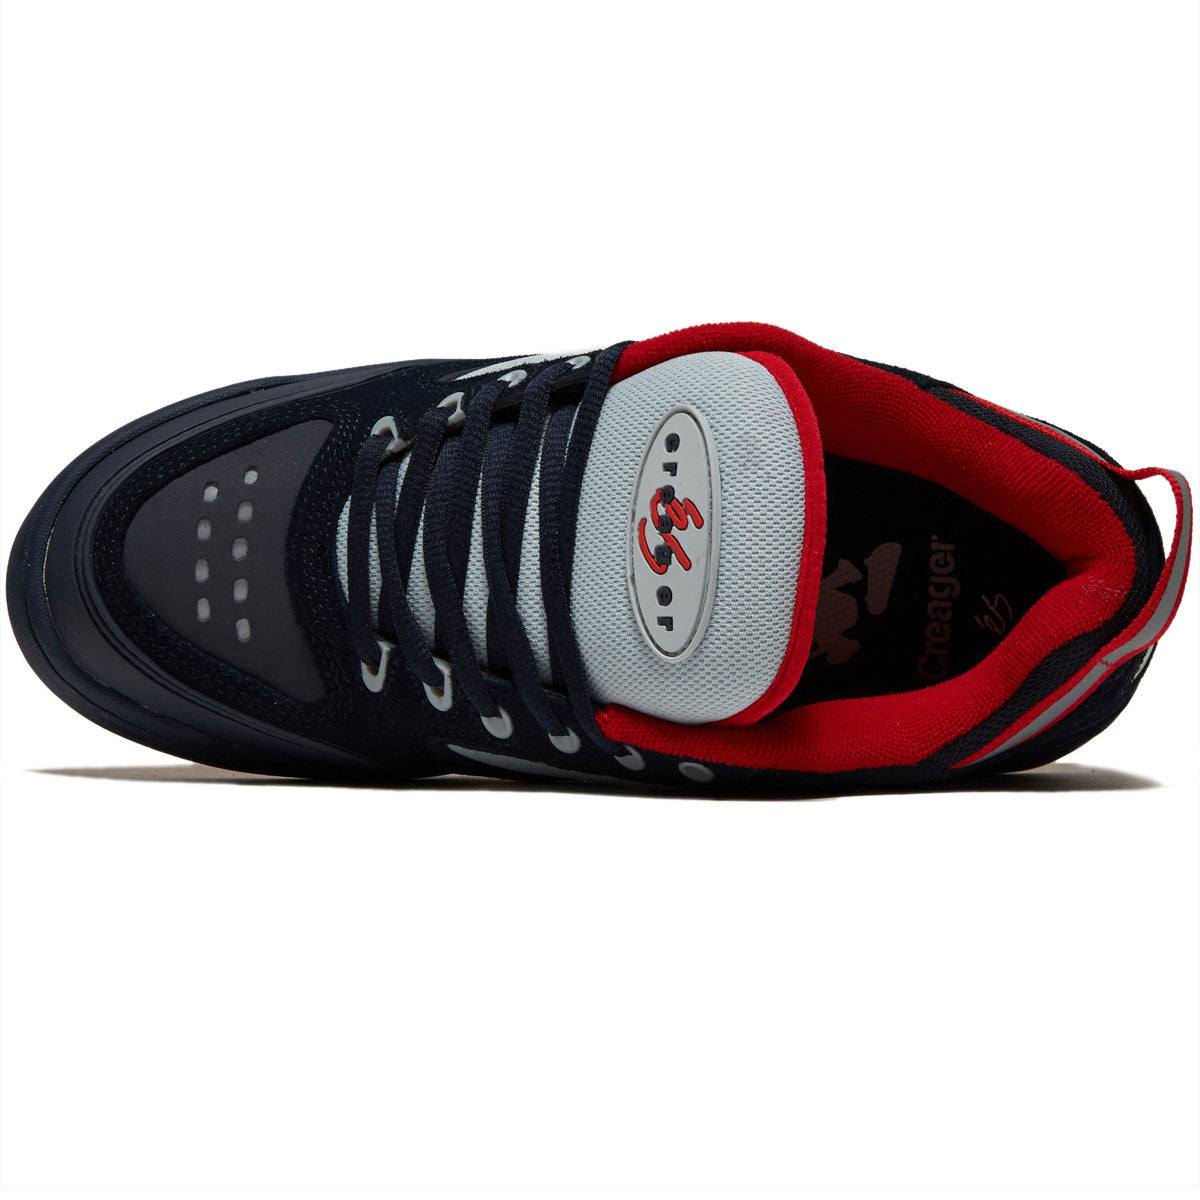 eS Creager Shoes - Navy/Grey/Red image 3